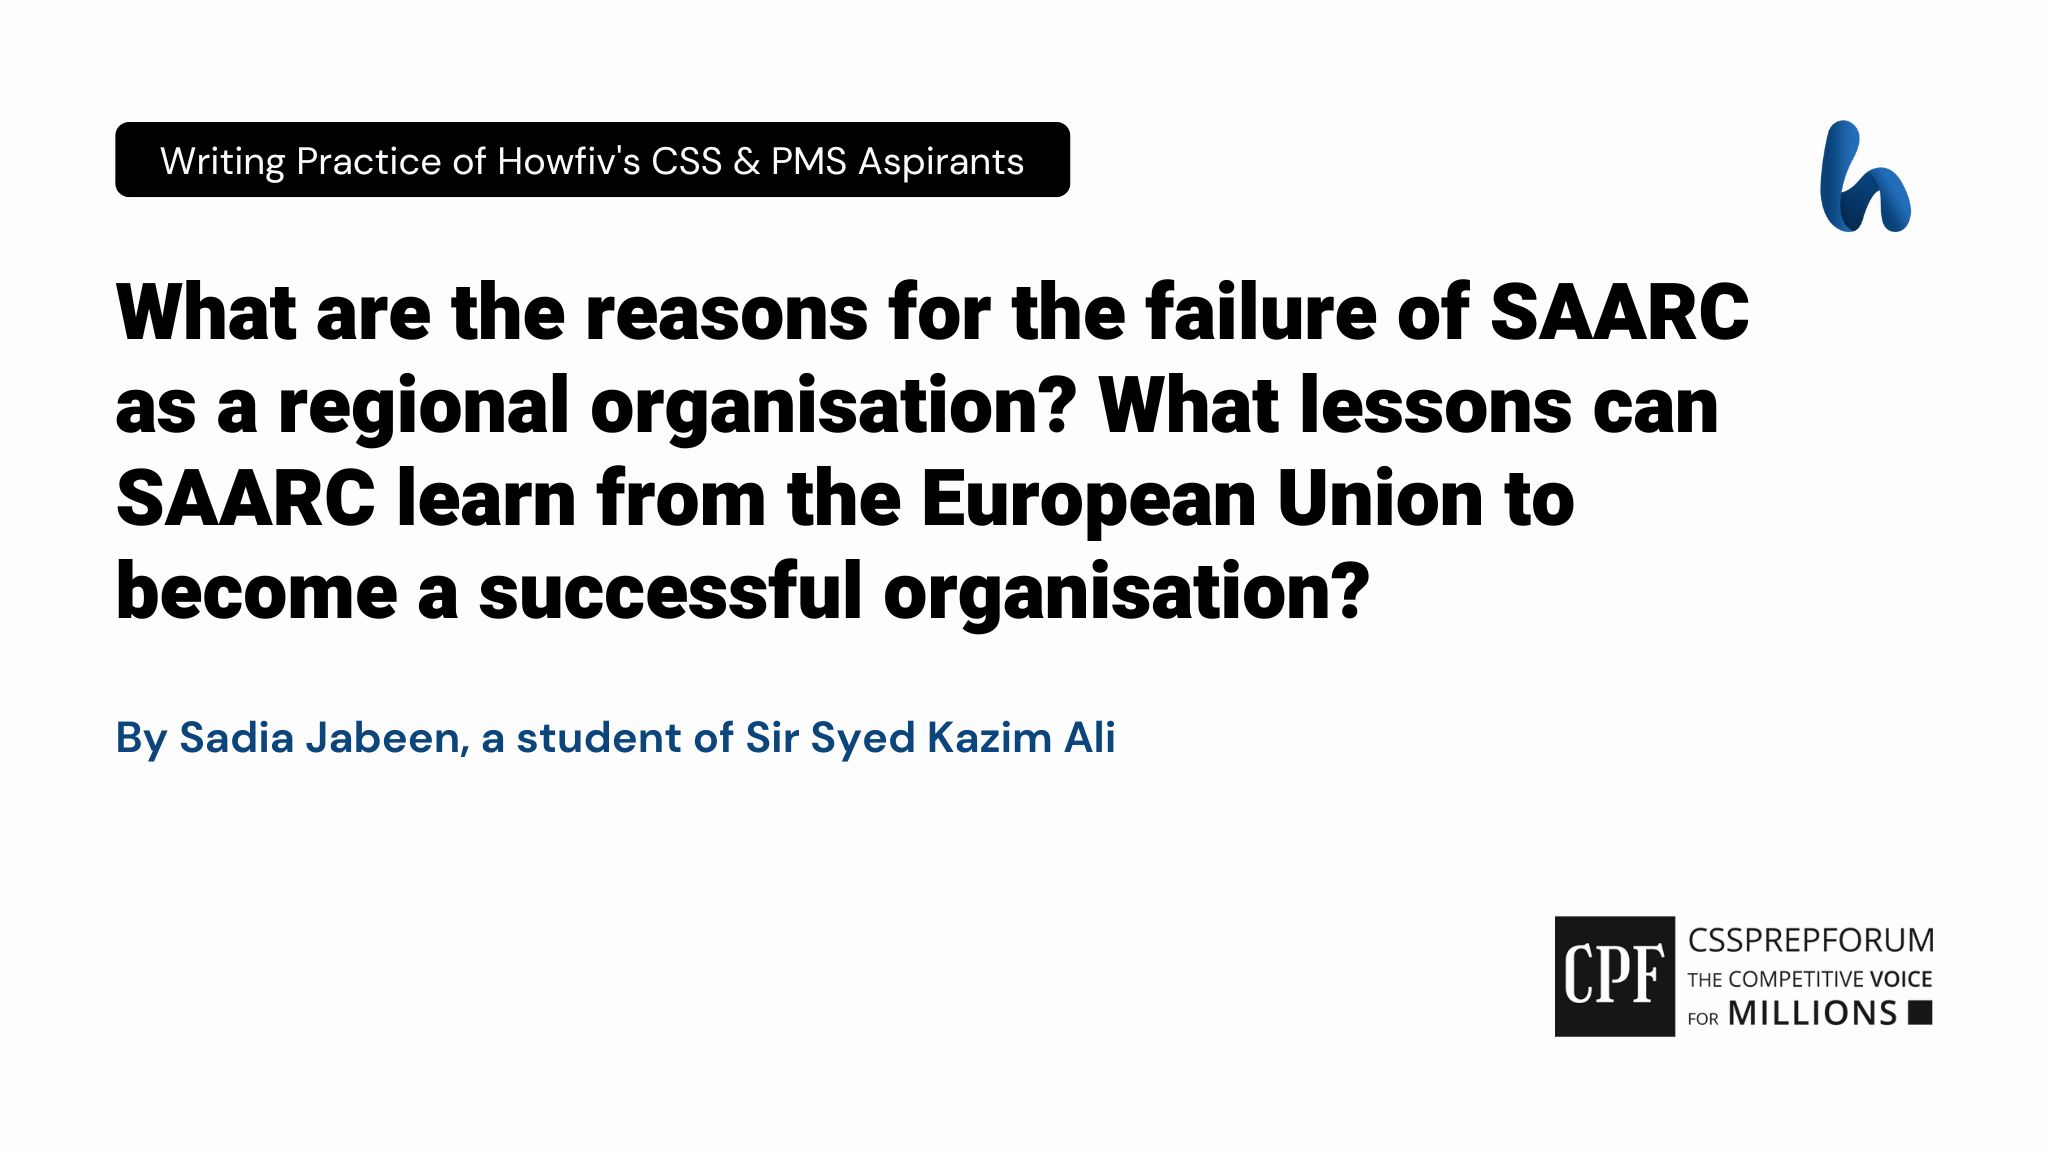 What-are-the-reasons-for-the-failure-of-SAARC-as-a-regional-organisation-What-lessons-SAARC-can-learn-from-European-Union-to-become-a-successful-organisation